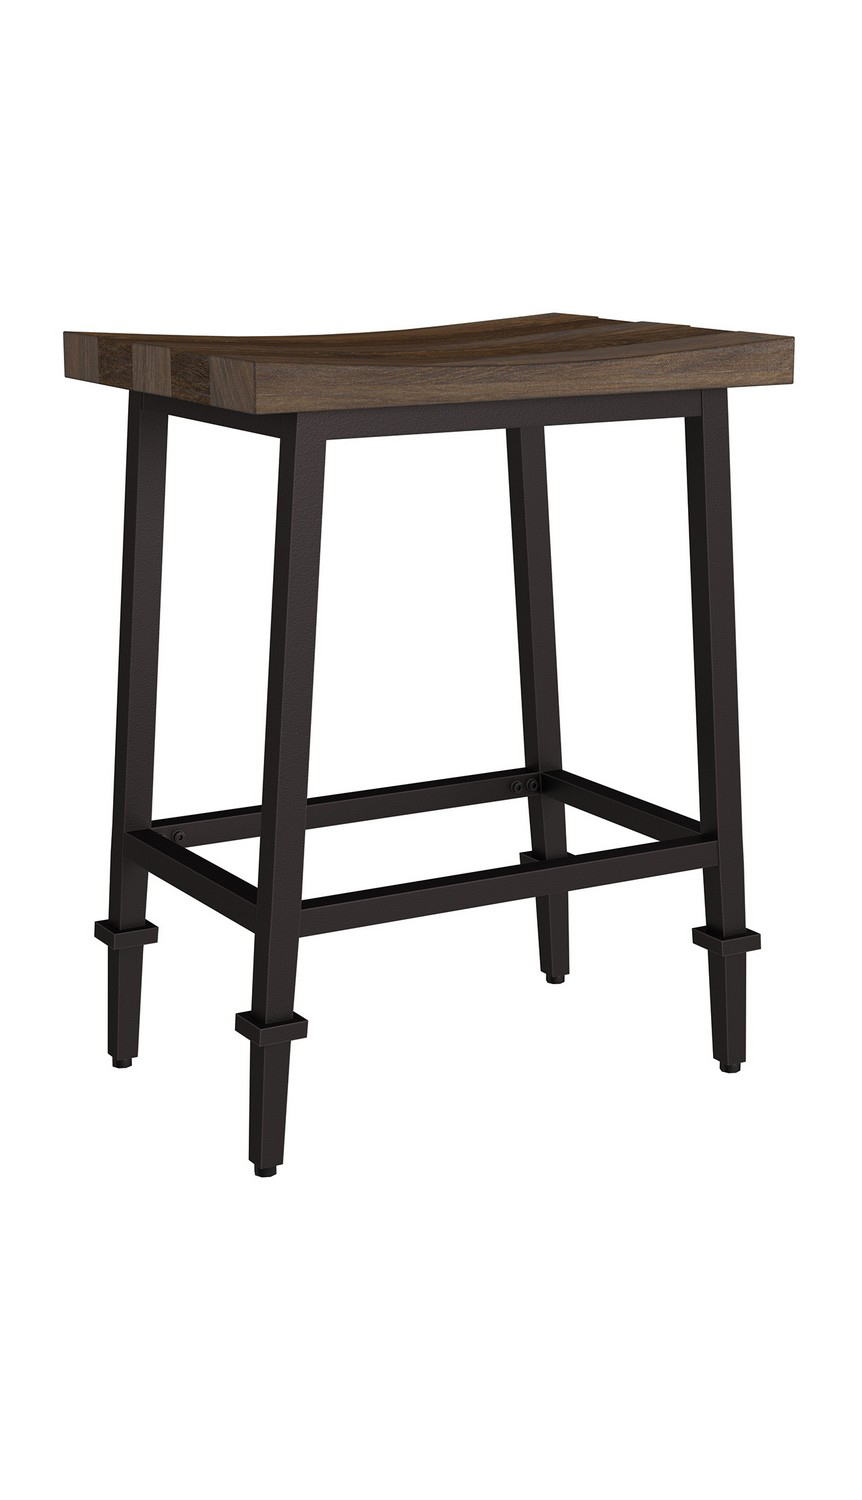 Hillsdale Trevino Metal Backless Counter Height Stool - Set of 2 - Distressed Walnut